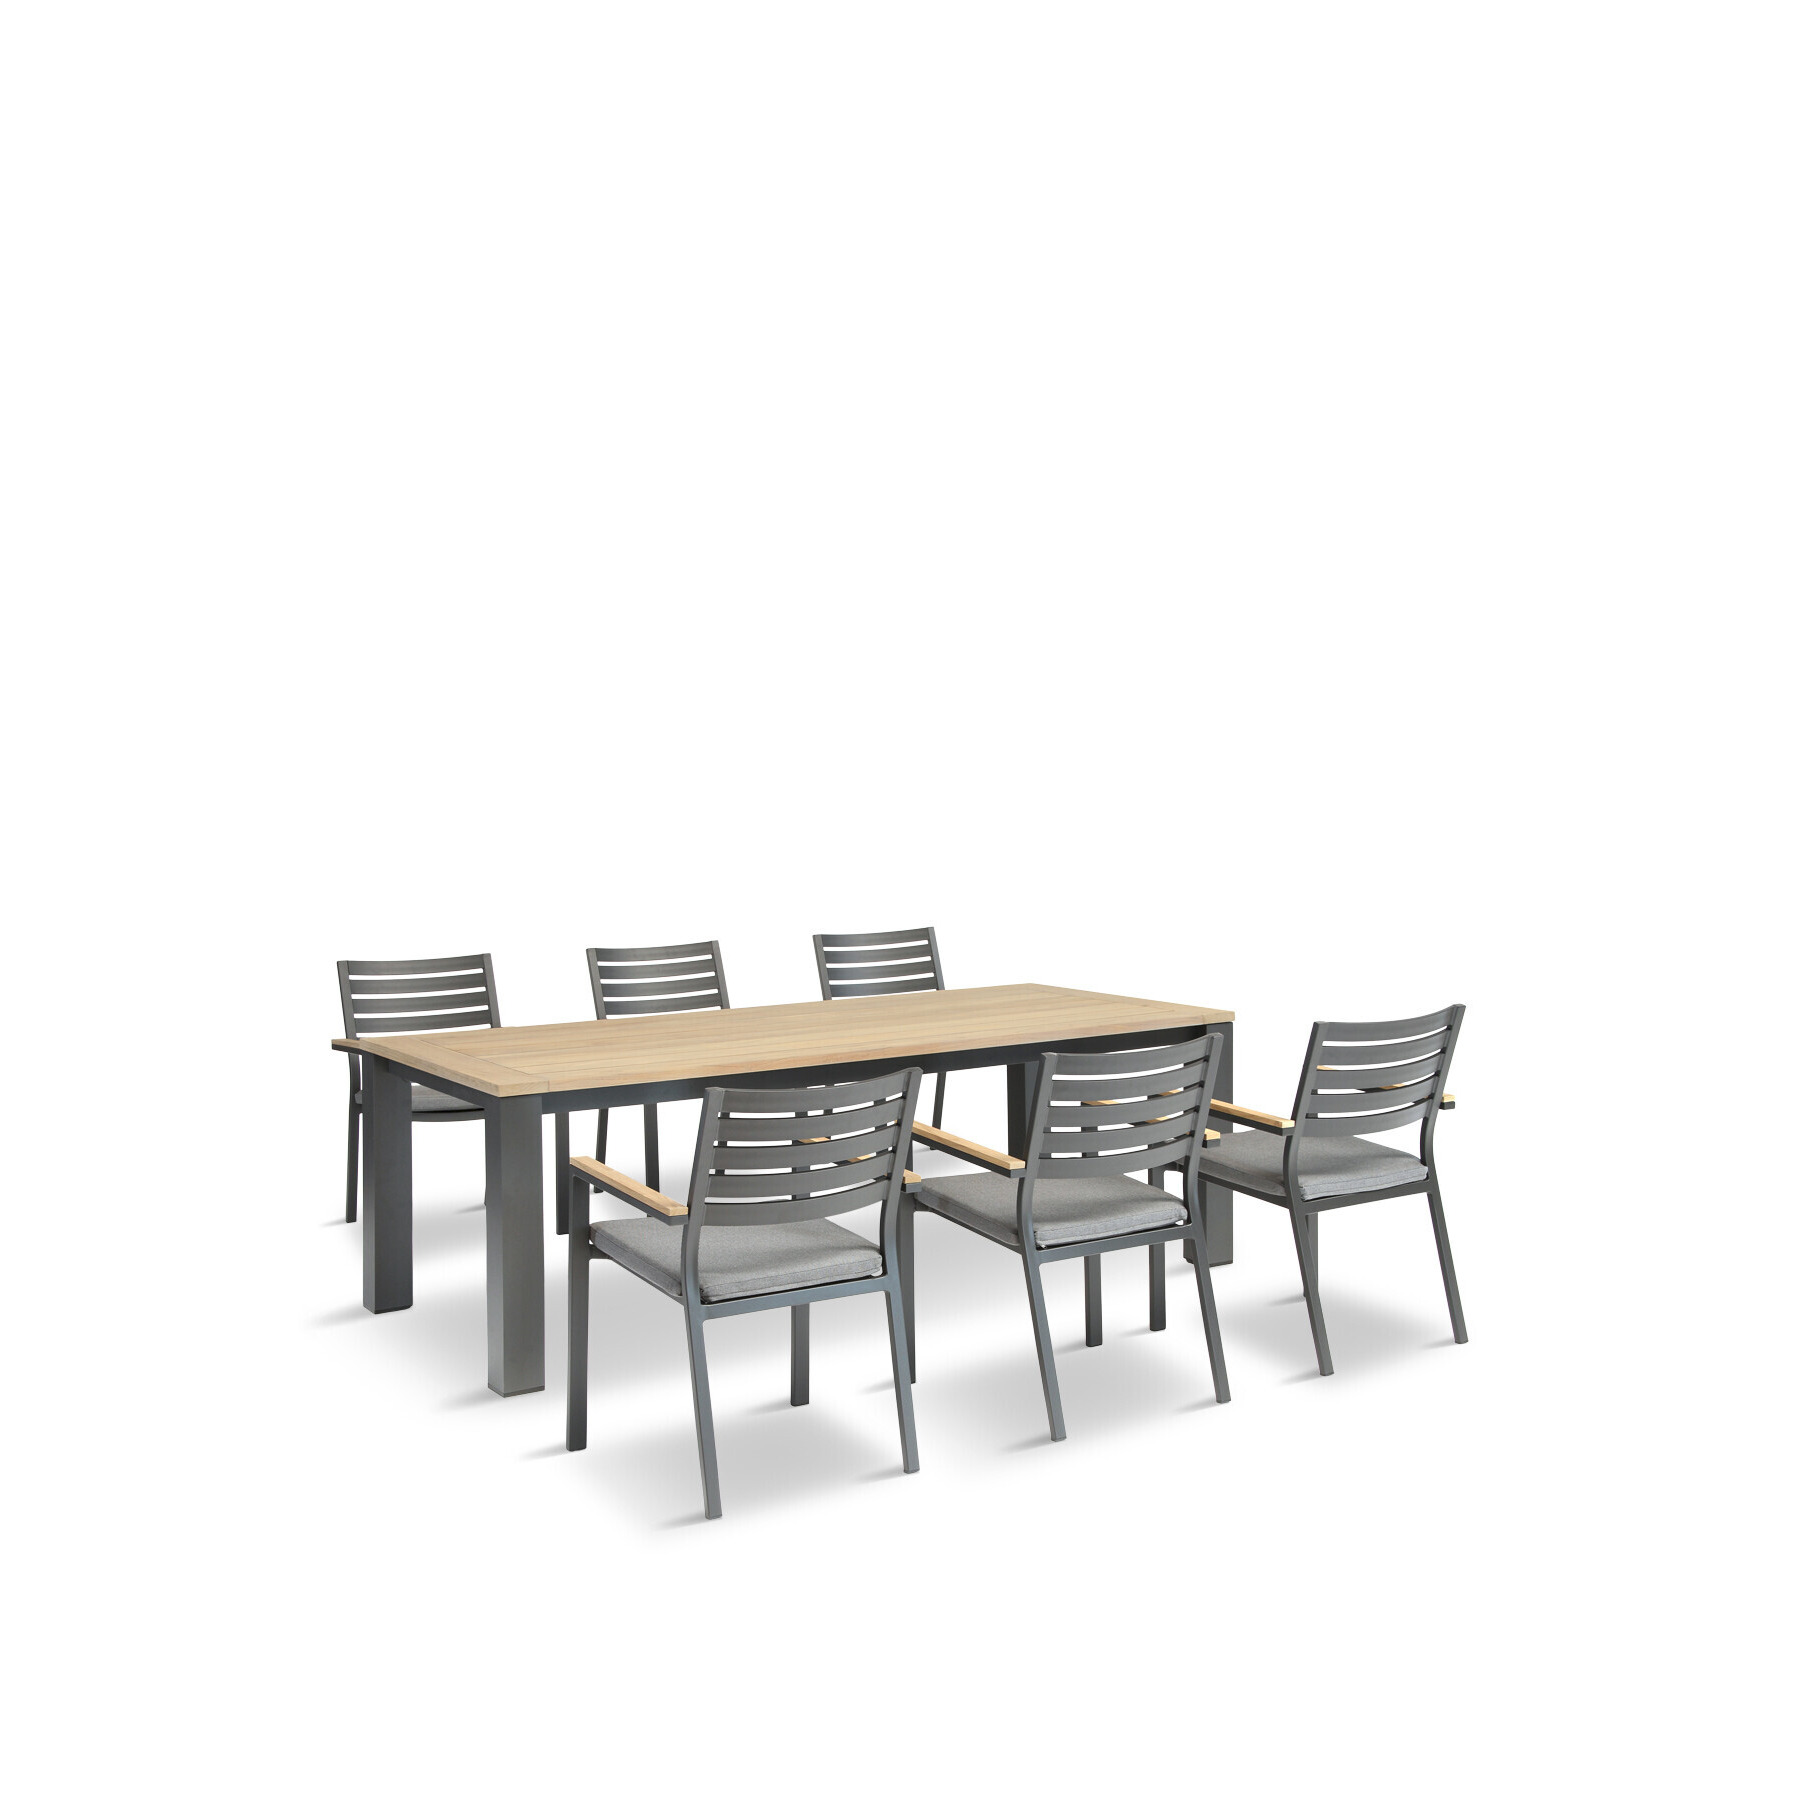 Kettler Elba 6 Seat Dining Set with Dining Table and 6 Chairs Grey - image 1